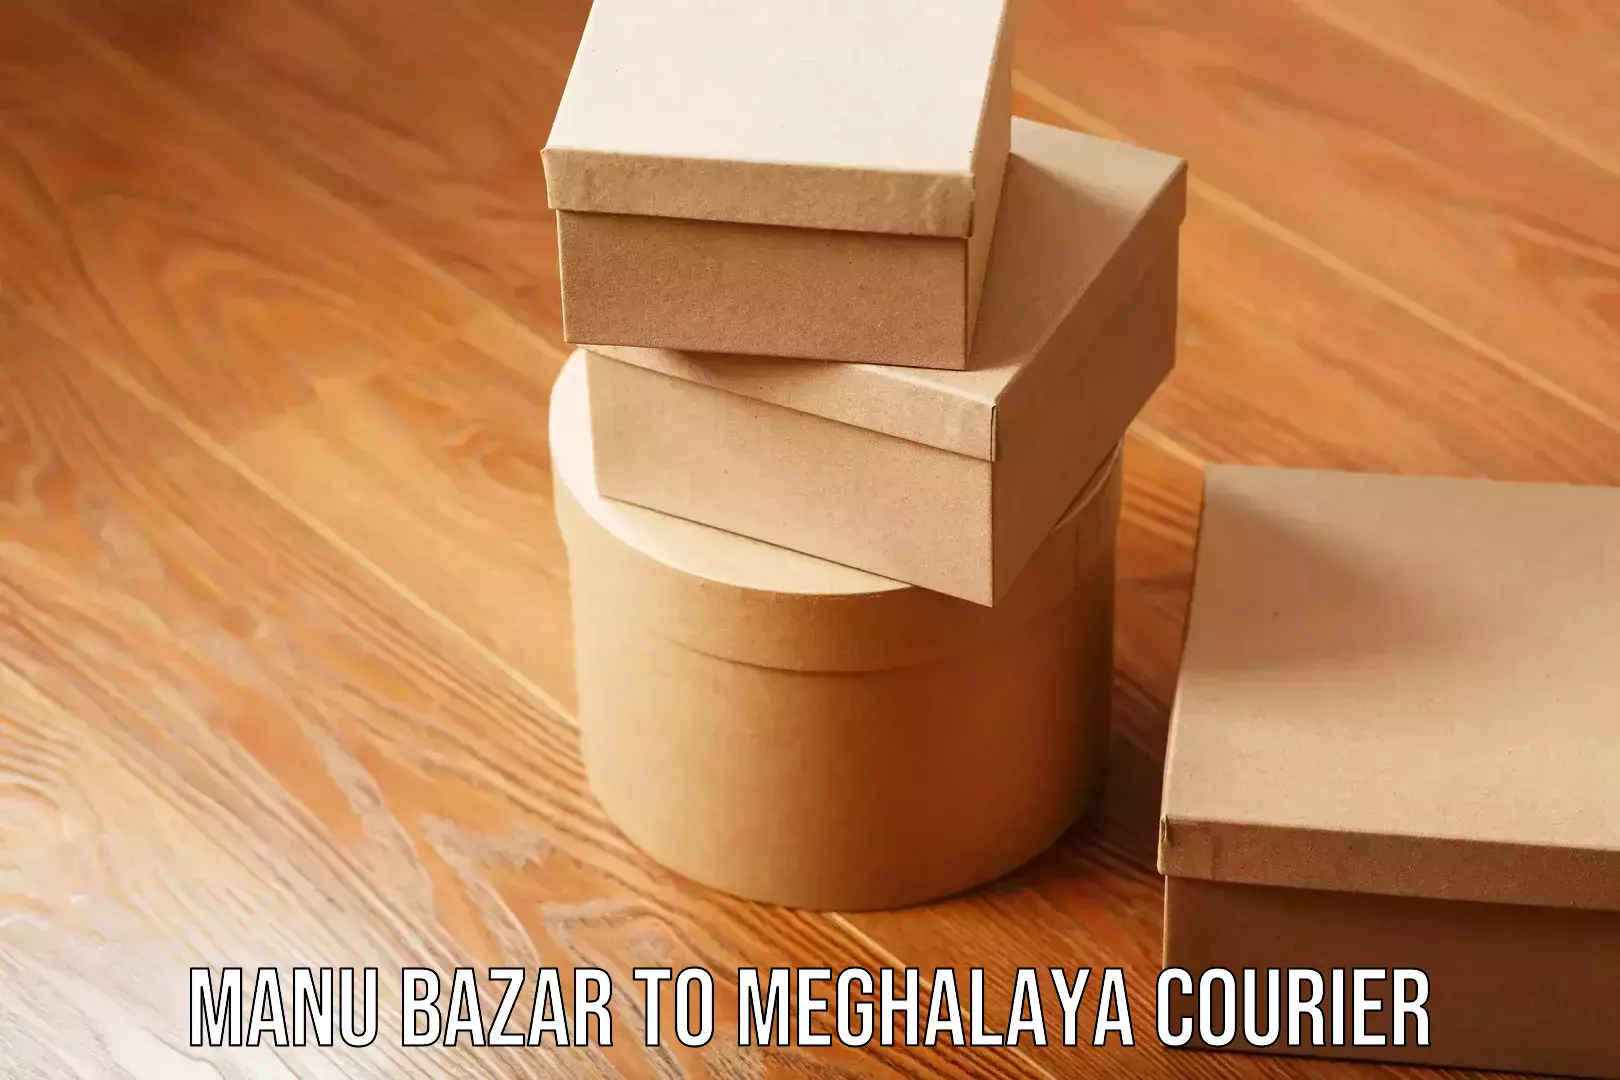 Cost-effective courier solutions Manu Bazar to Meghalaya